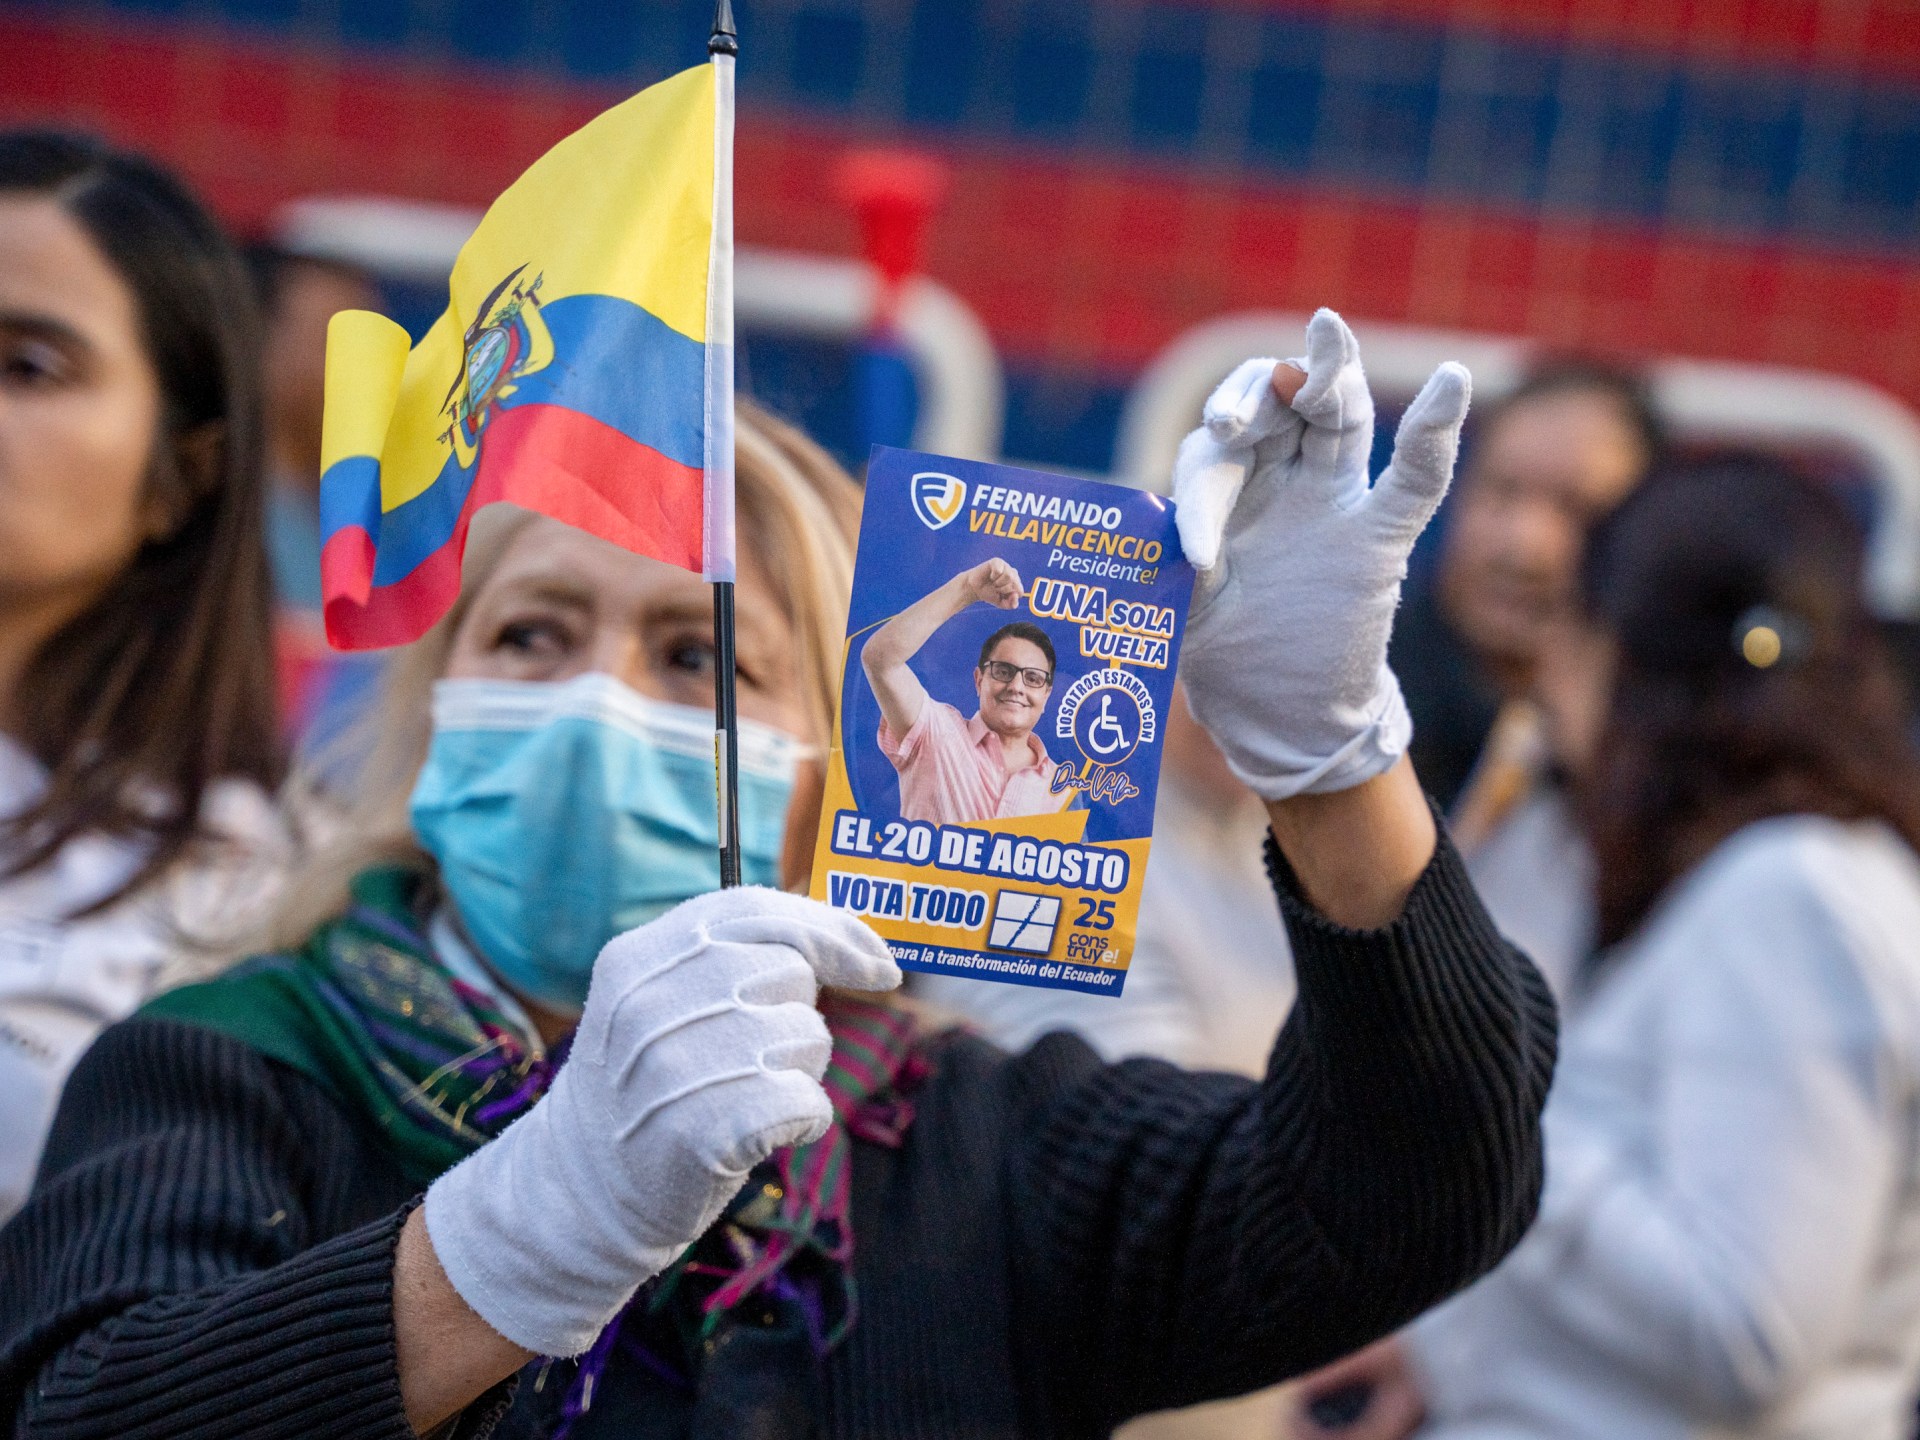 ‘We are afraid’: Ecuadorians react to presidential candidate’s killing